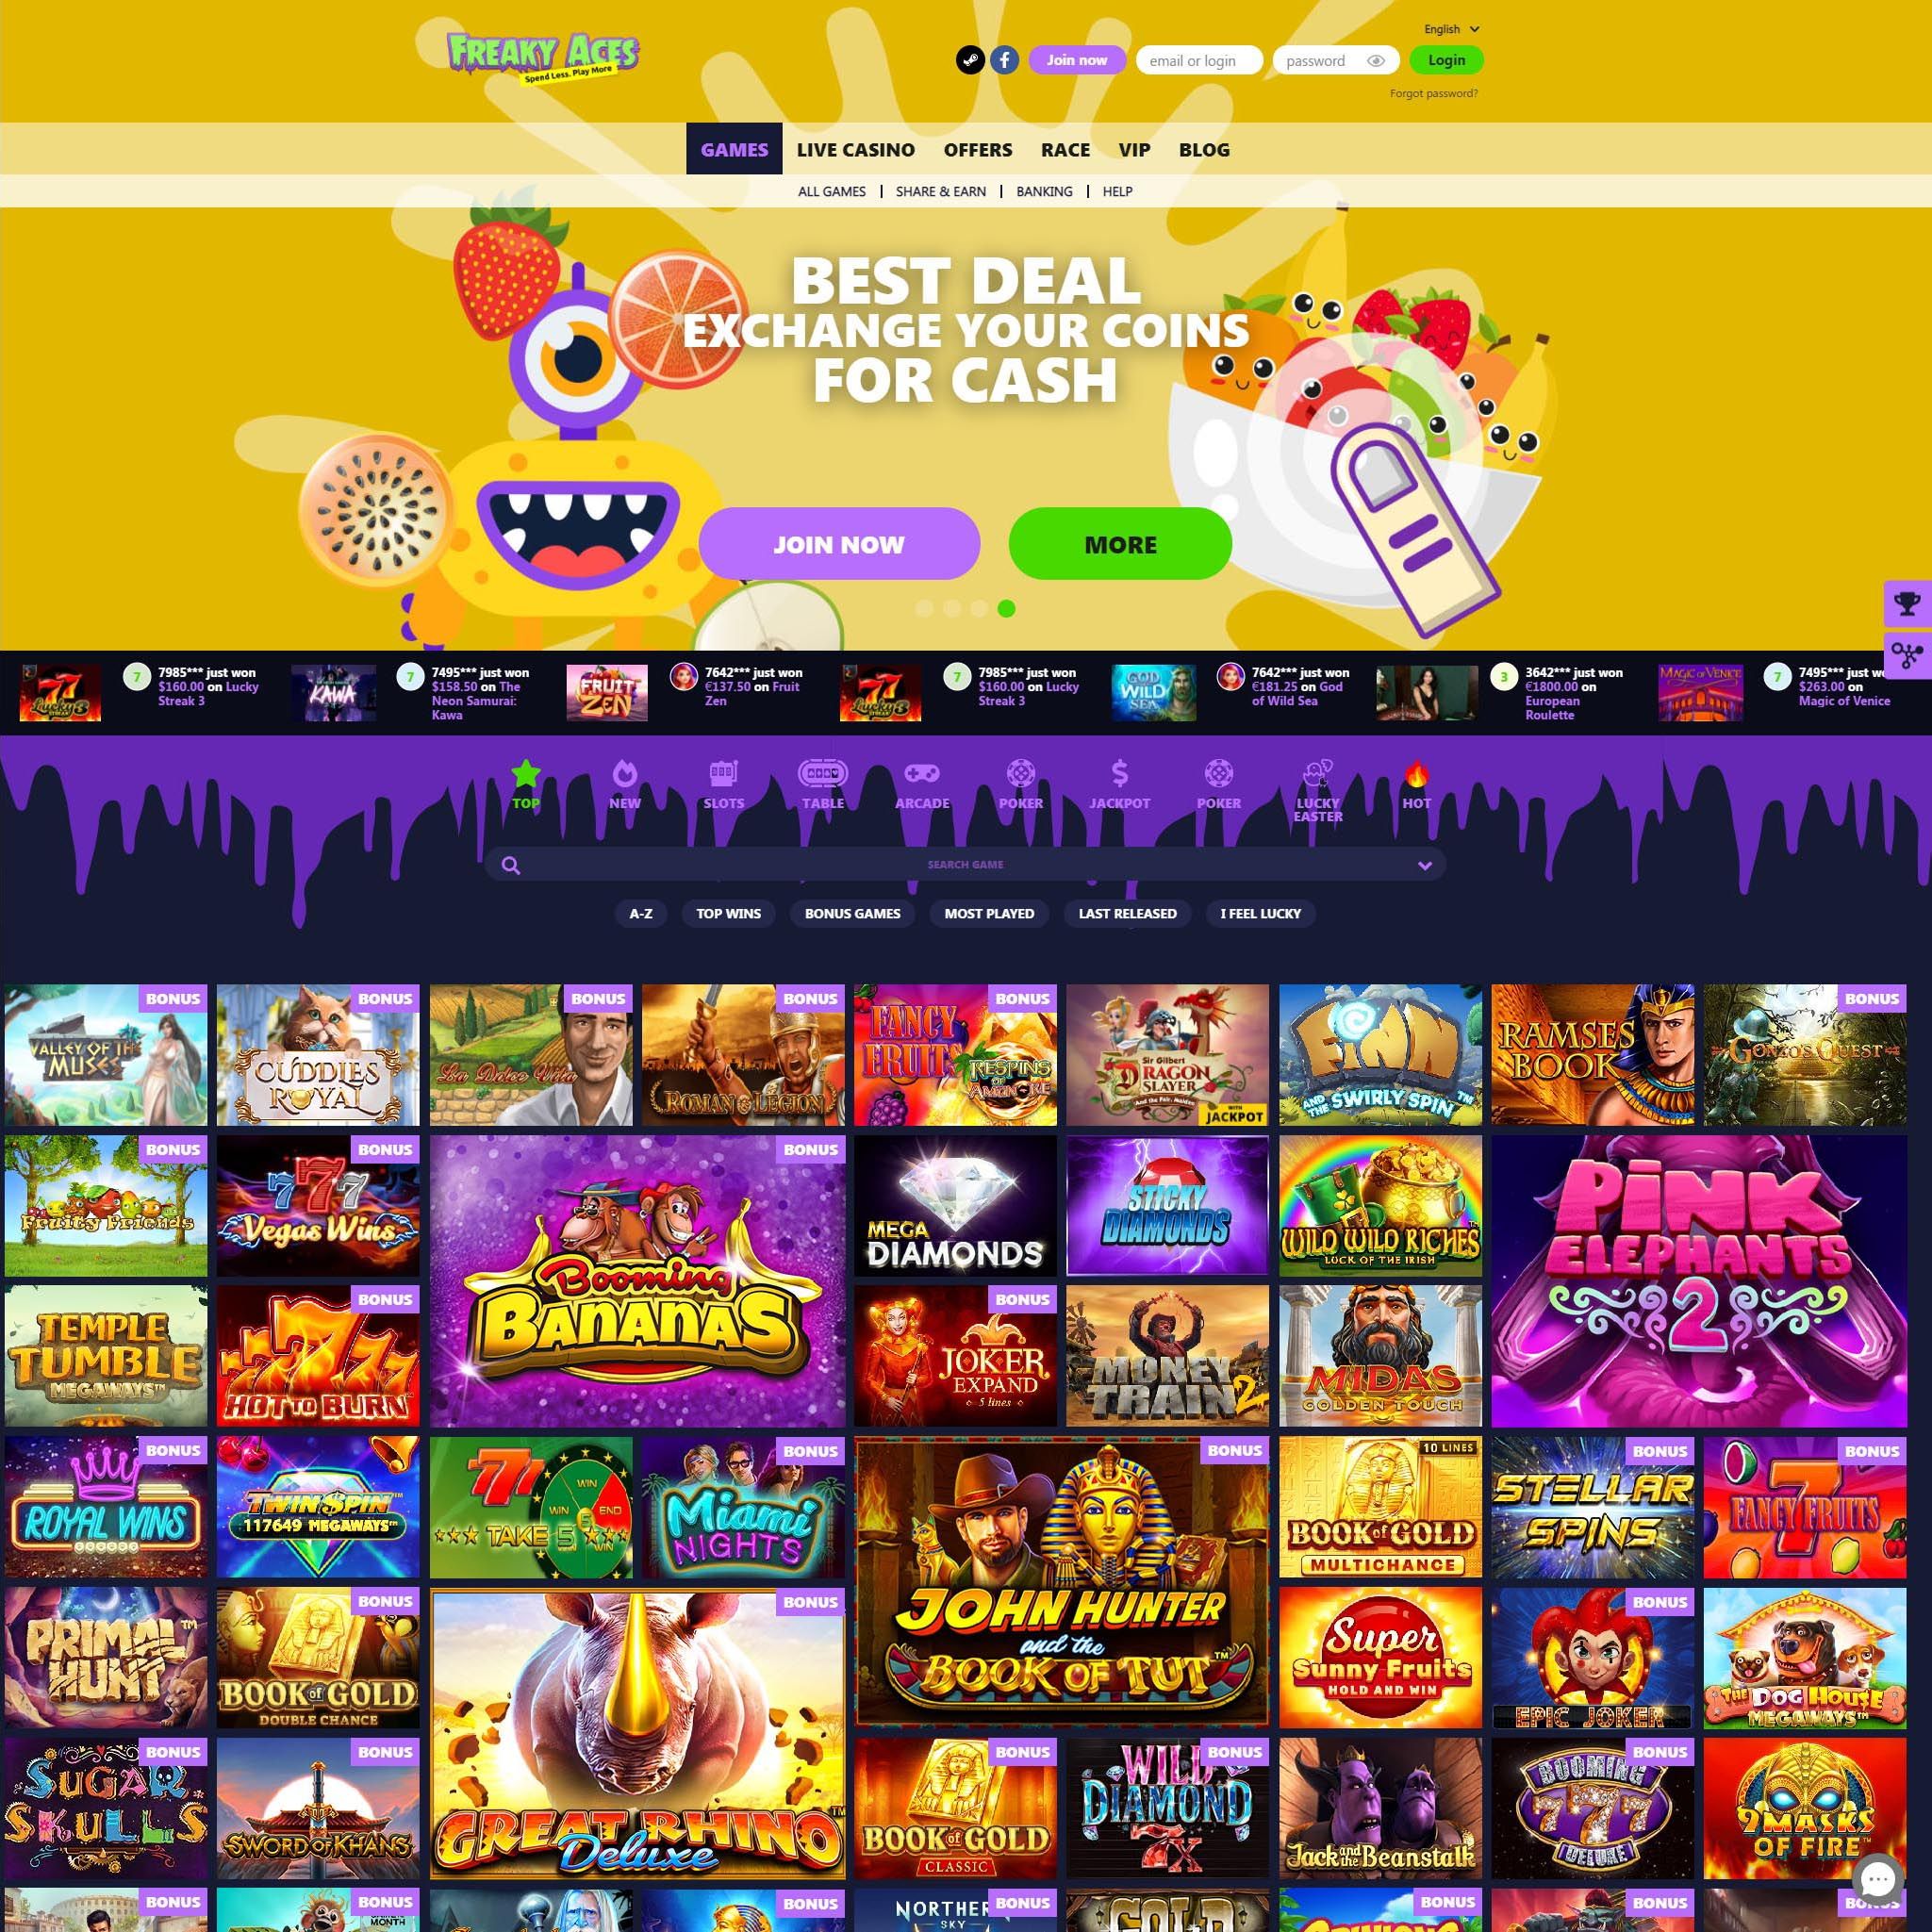 Freaky Aces Casino full games catalogue